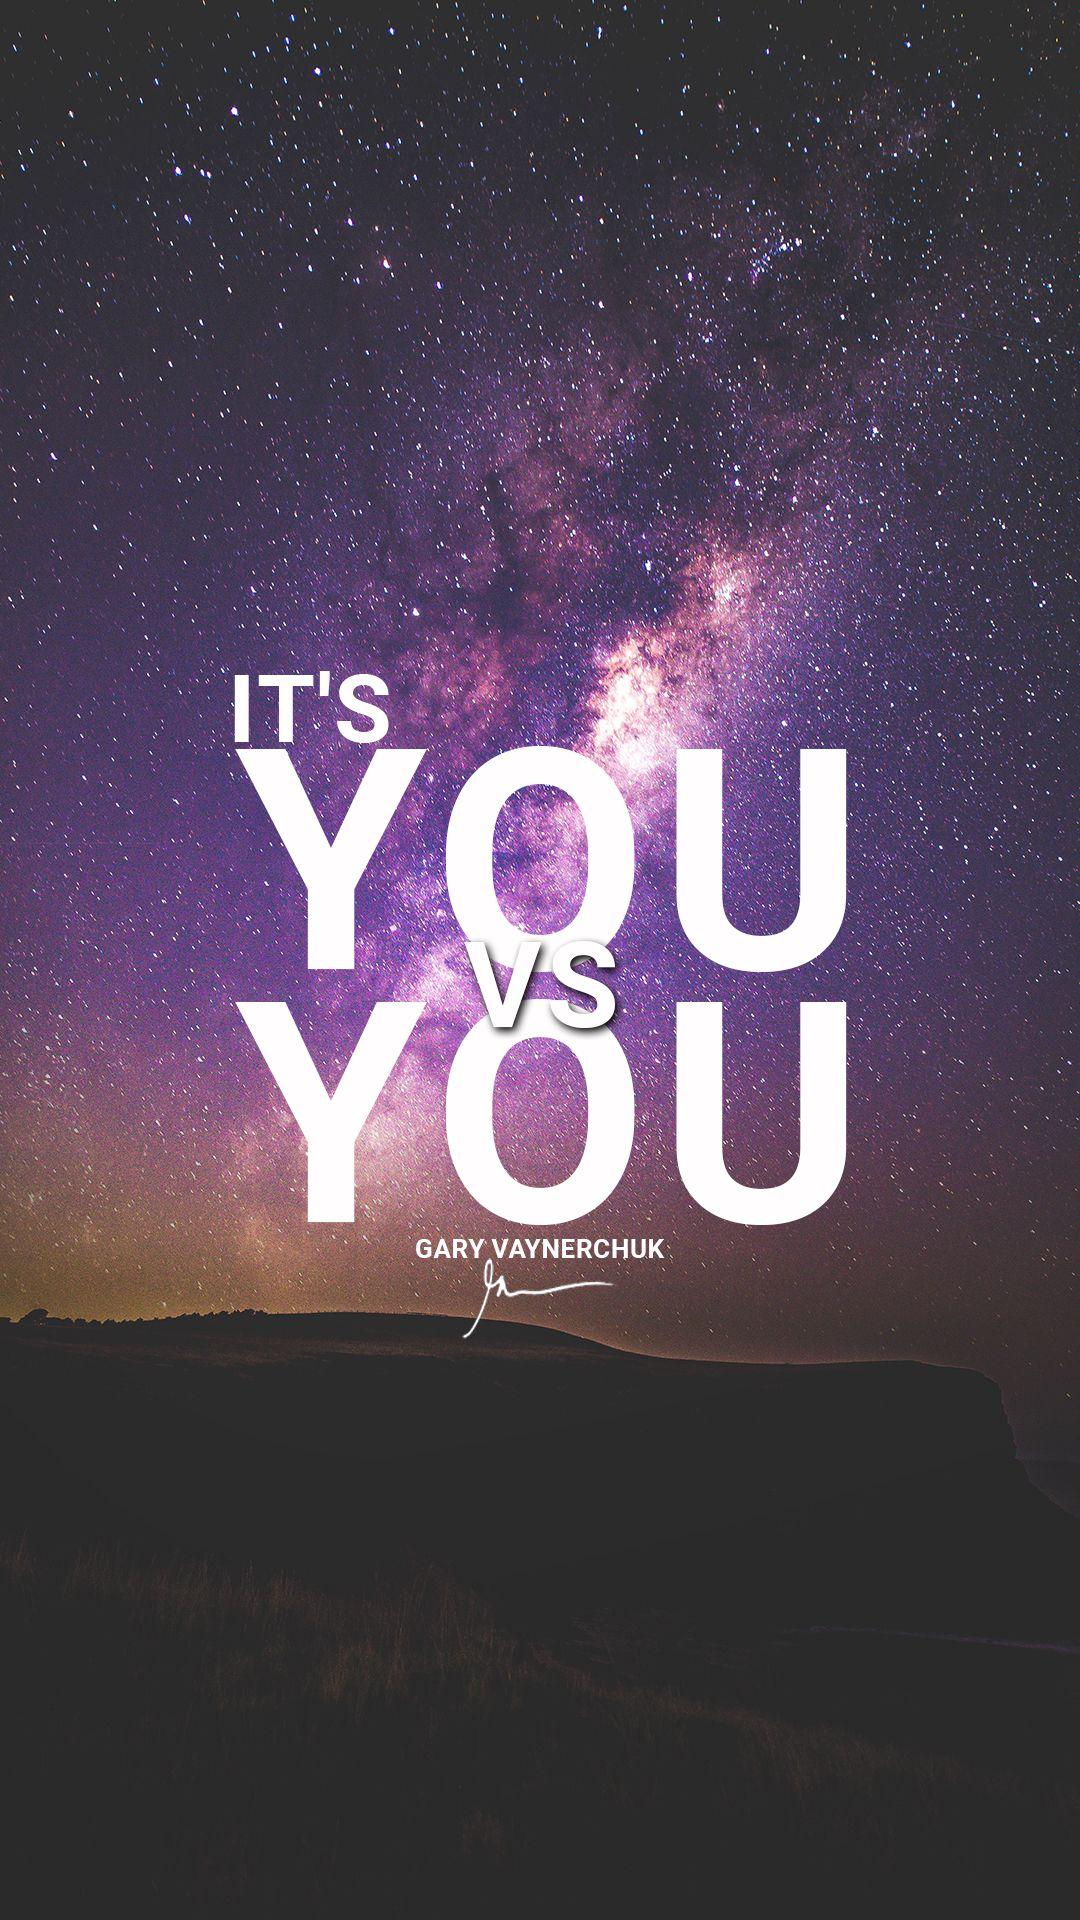 It's You Vs You Gary Vaynershuk Motivational Quotes Millionaire wallpaper. Inspirational quotes wallpaper, Daily quotes positive, Motivational quotes wallpaper